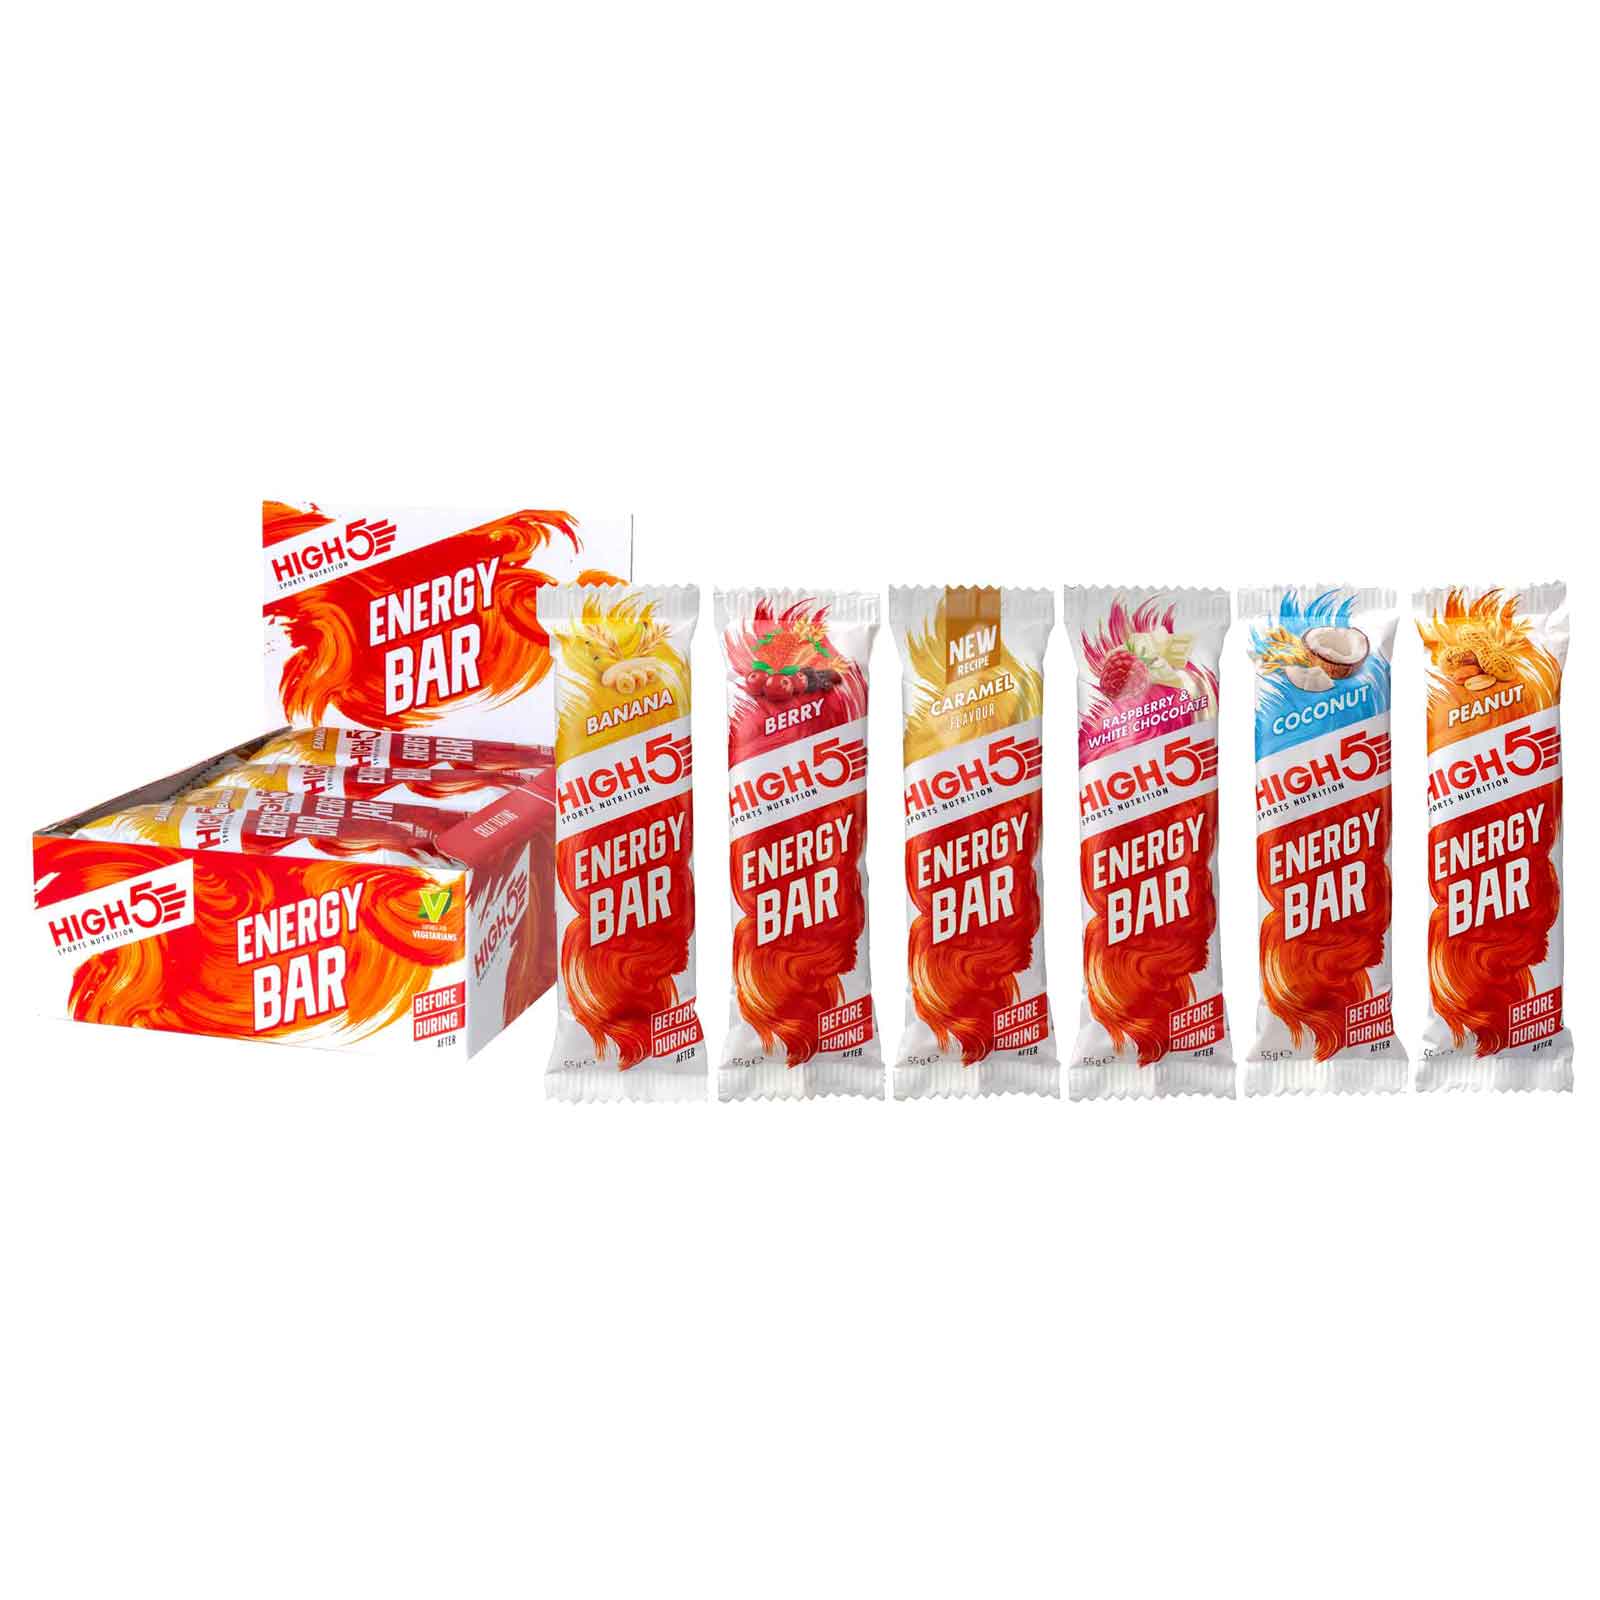 Picture of High5 Energy Bar with Carbohydrates - 12x55g